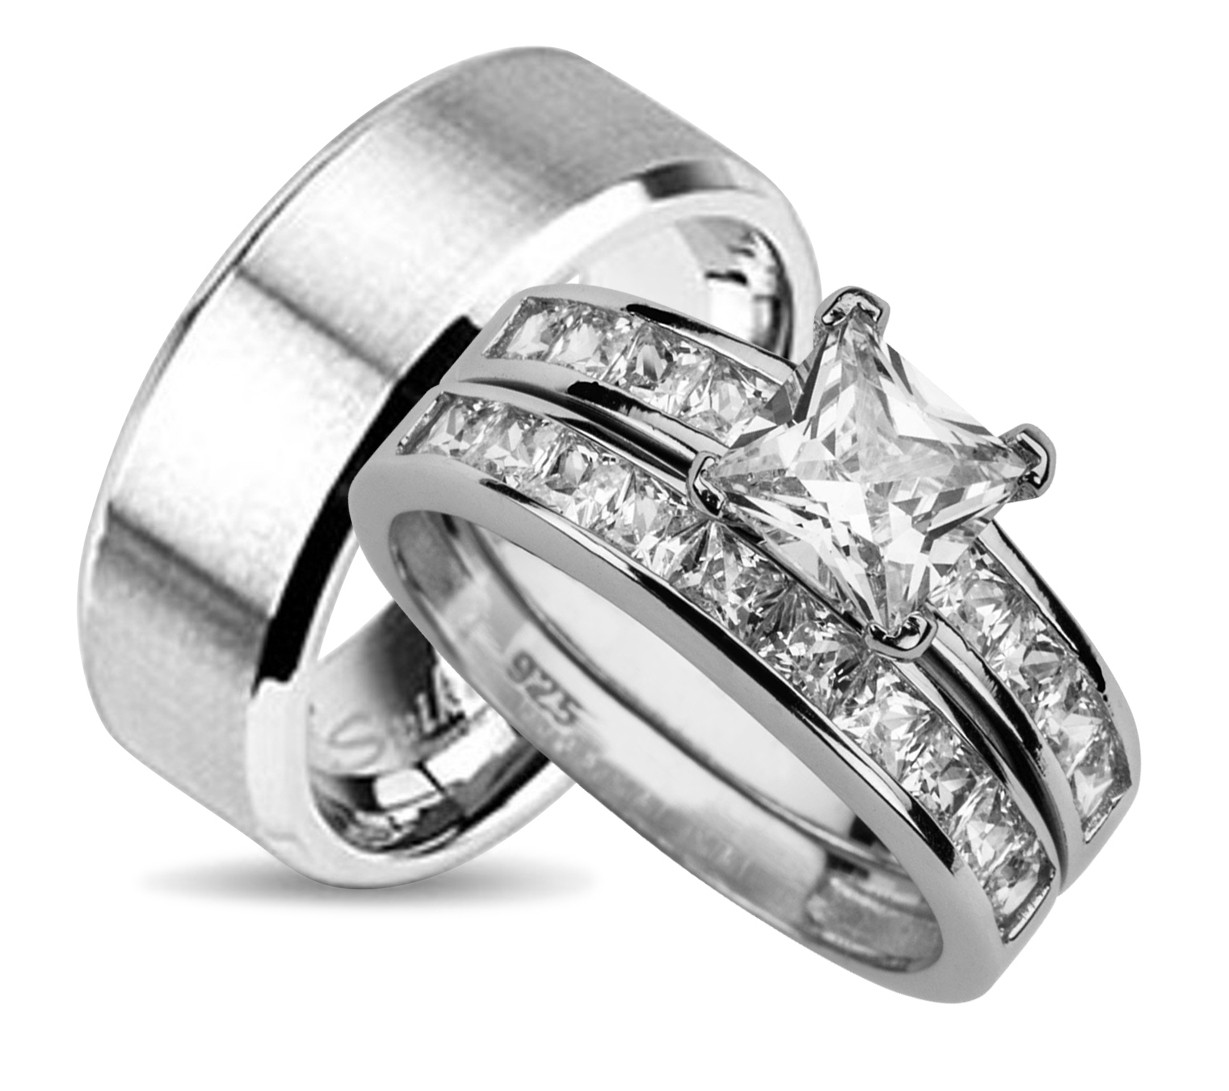 Wedding Bands Sets His And Her Matching
 LaRaso & Co His and Hers Wedding Ring Set Matching